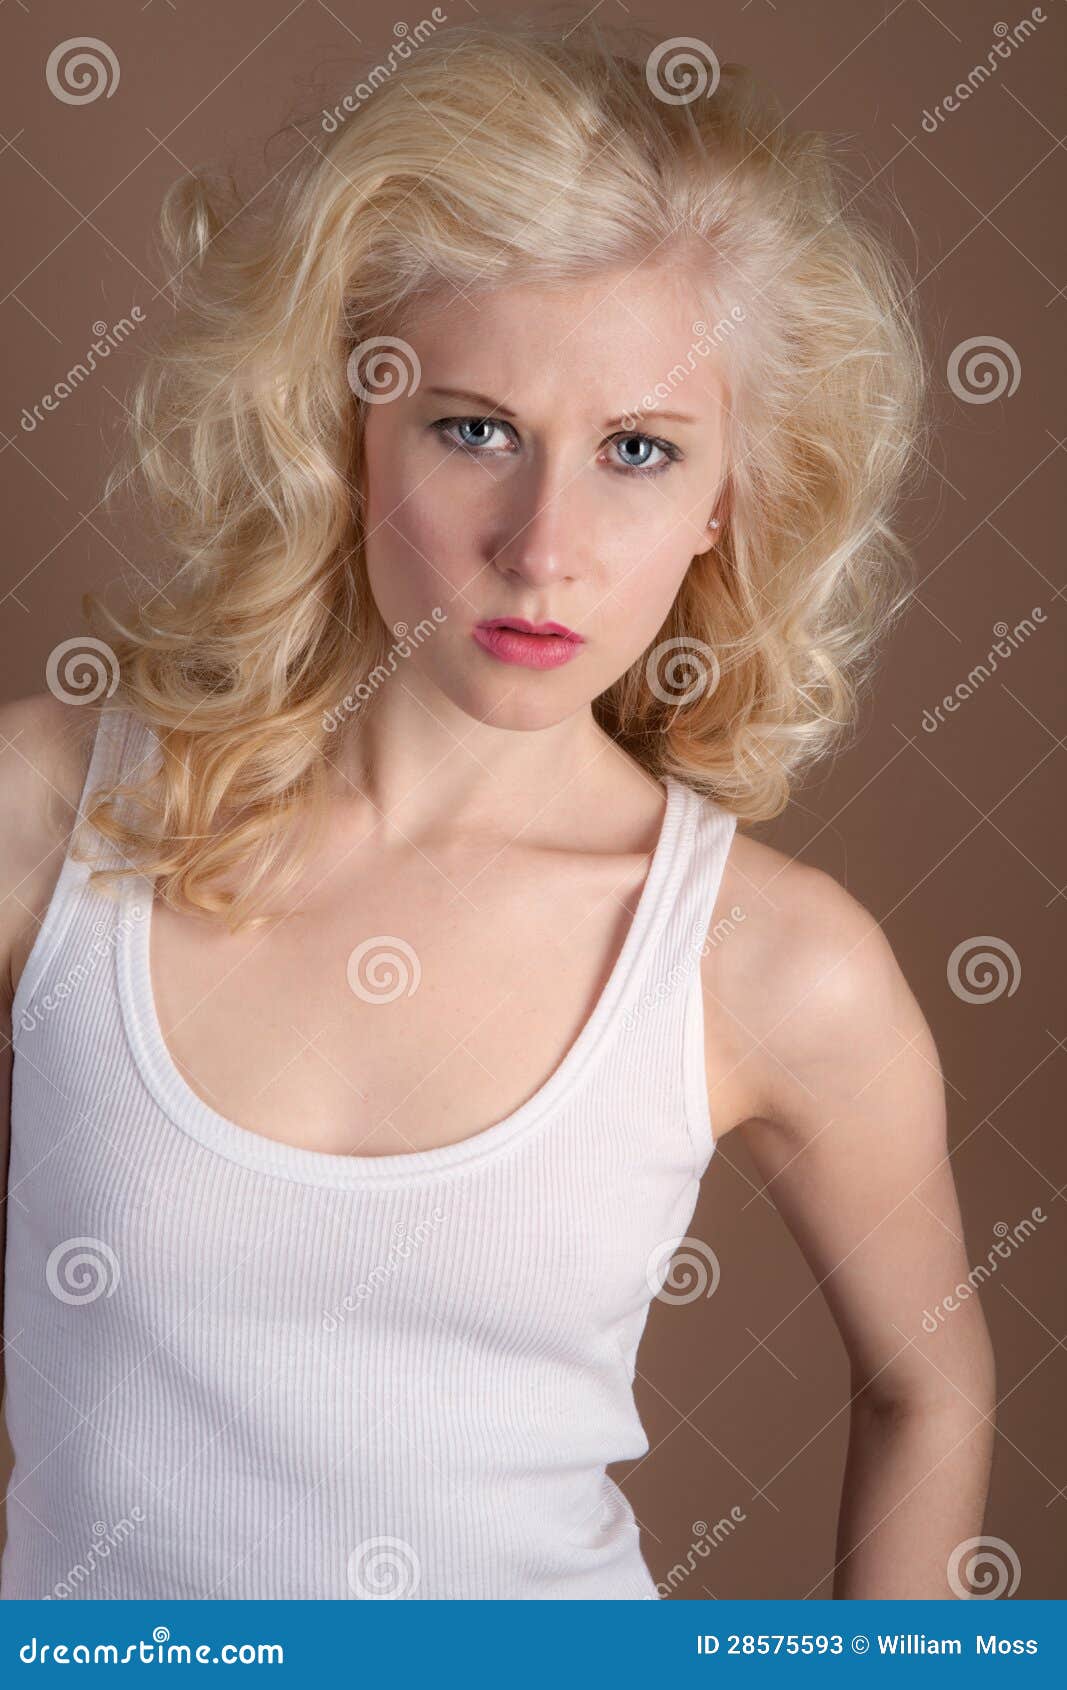 Sassy Teen stock image Nude Pic Hq